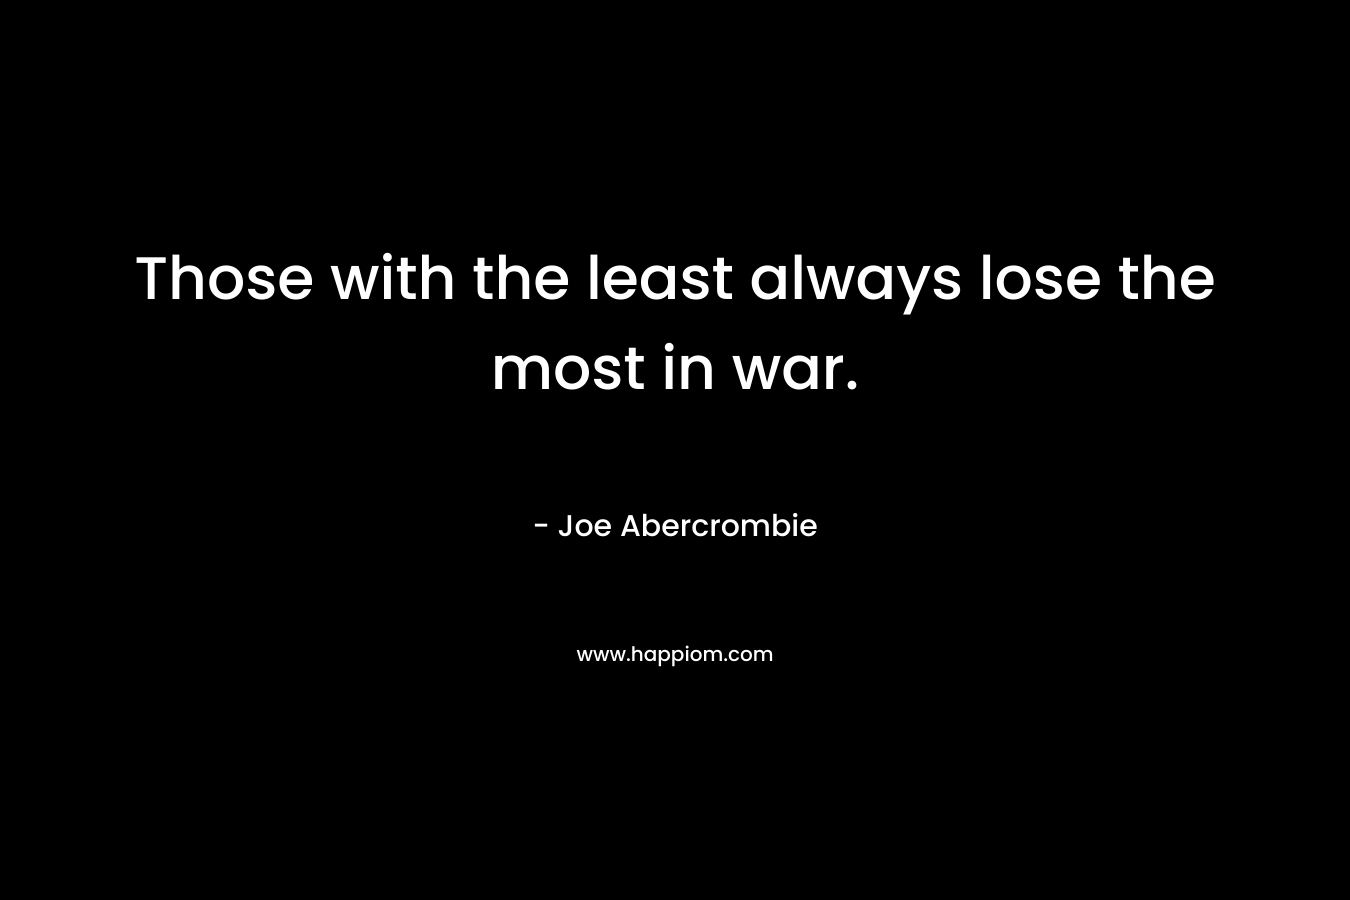 Those with the least always lose the most in war.